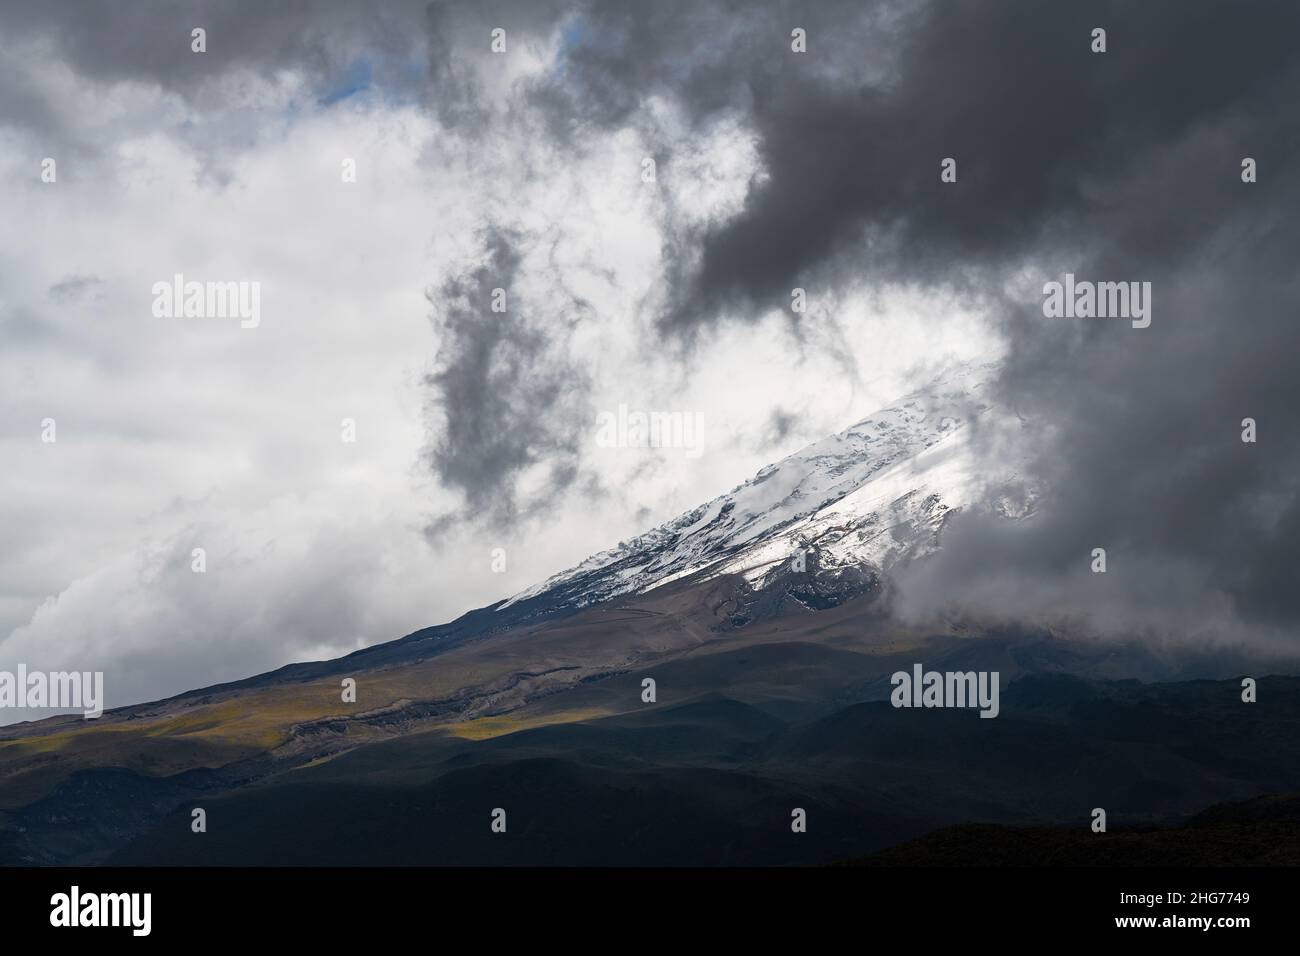 Dramatic Andes landscape of the Cotopaxi volcano with dark clouds and glacier with snow, Cotopaxi national park, Quito, Ecuador. Stock Photo